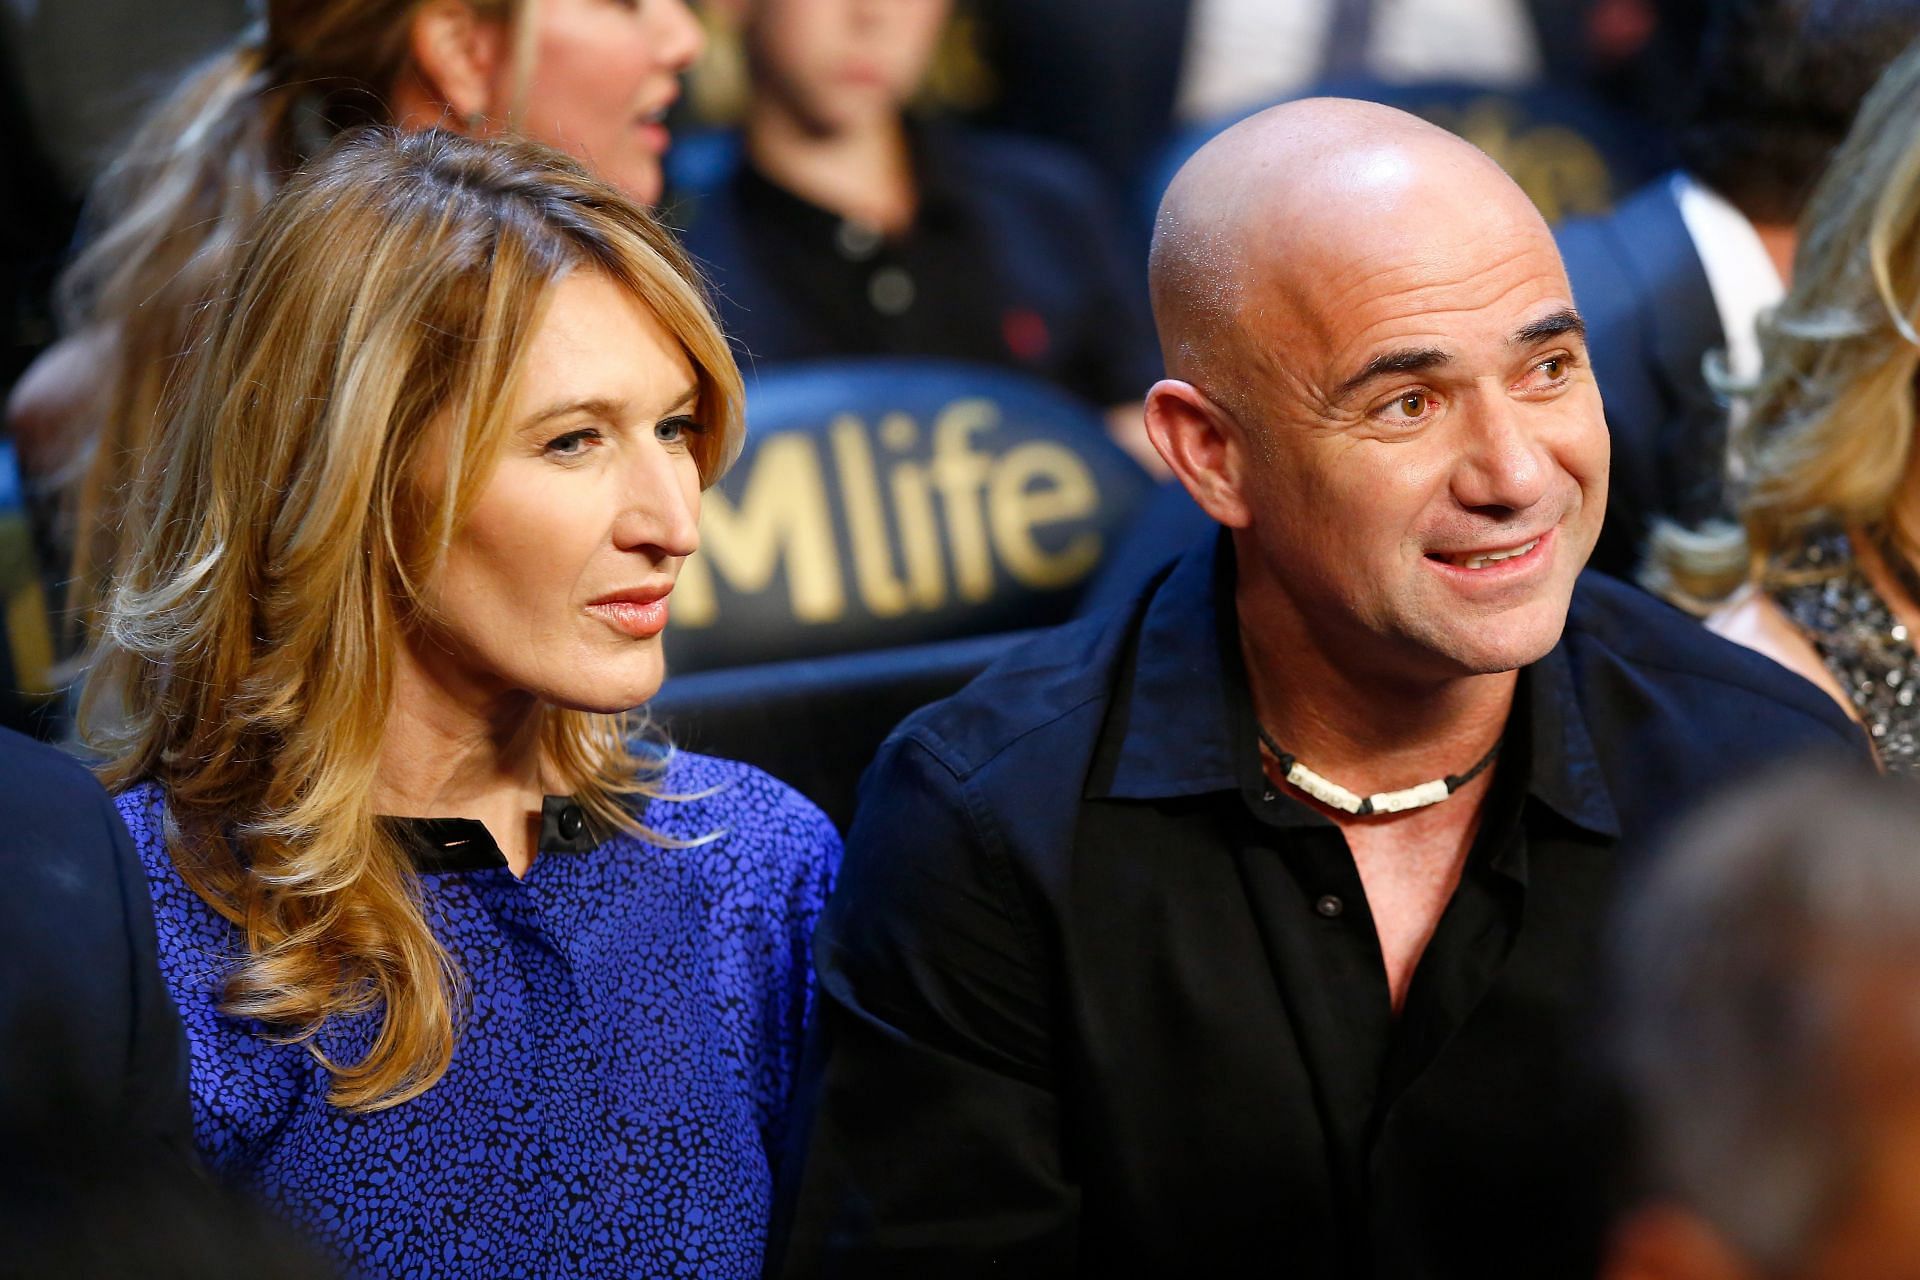 Steffi Graf and Andre Agassi at the MGM Grand Garden Arena in Las Vegas